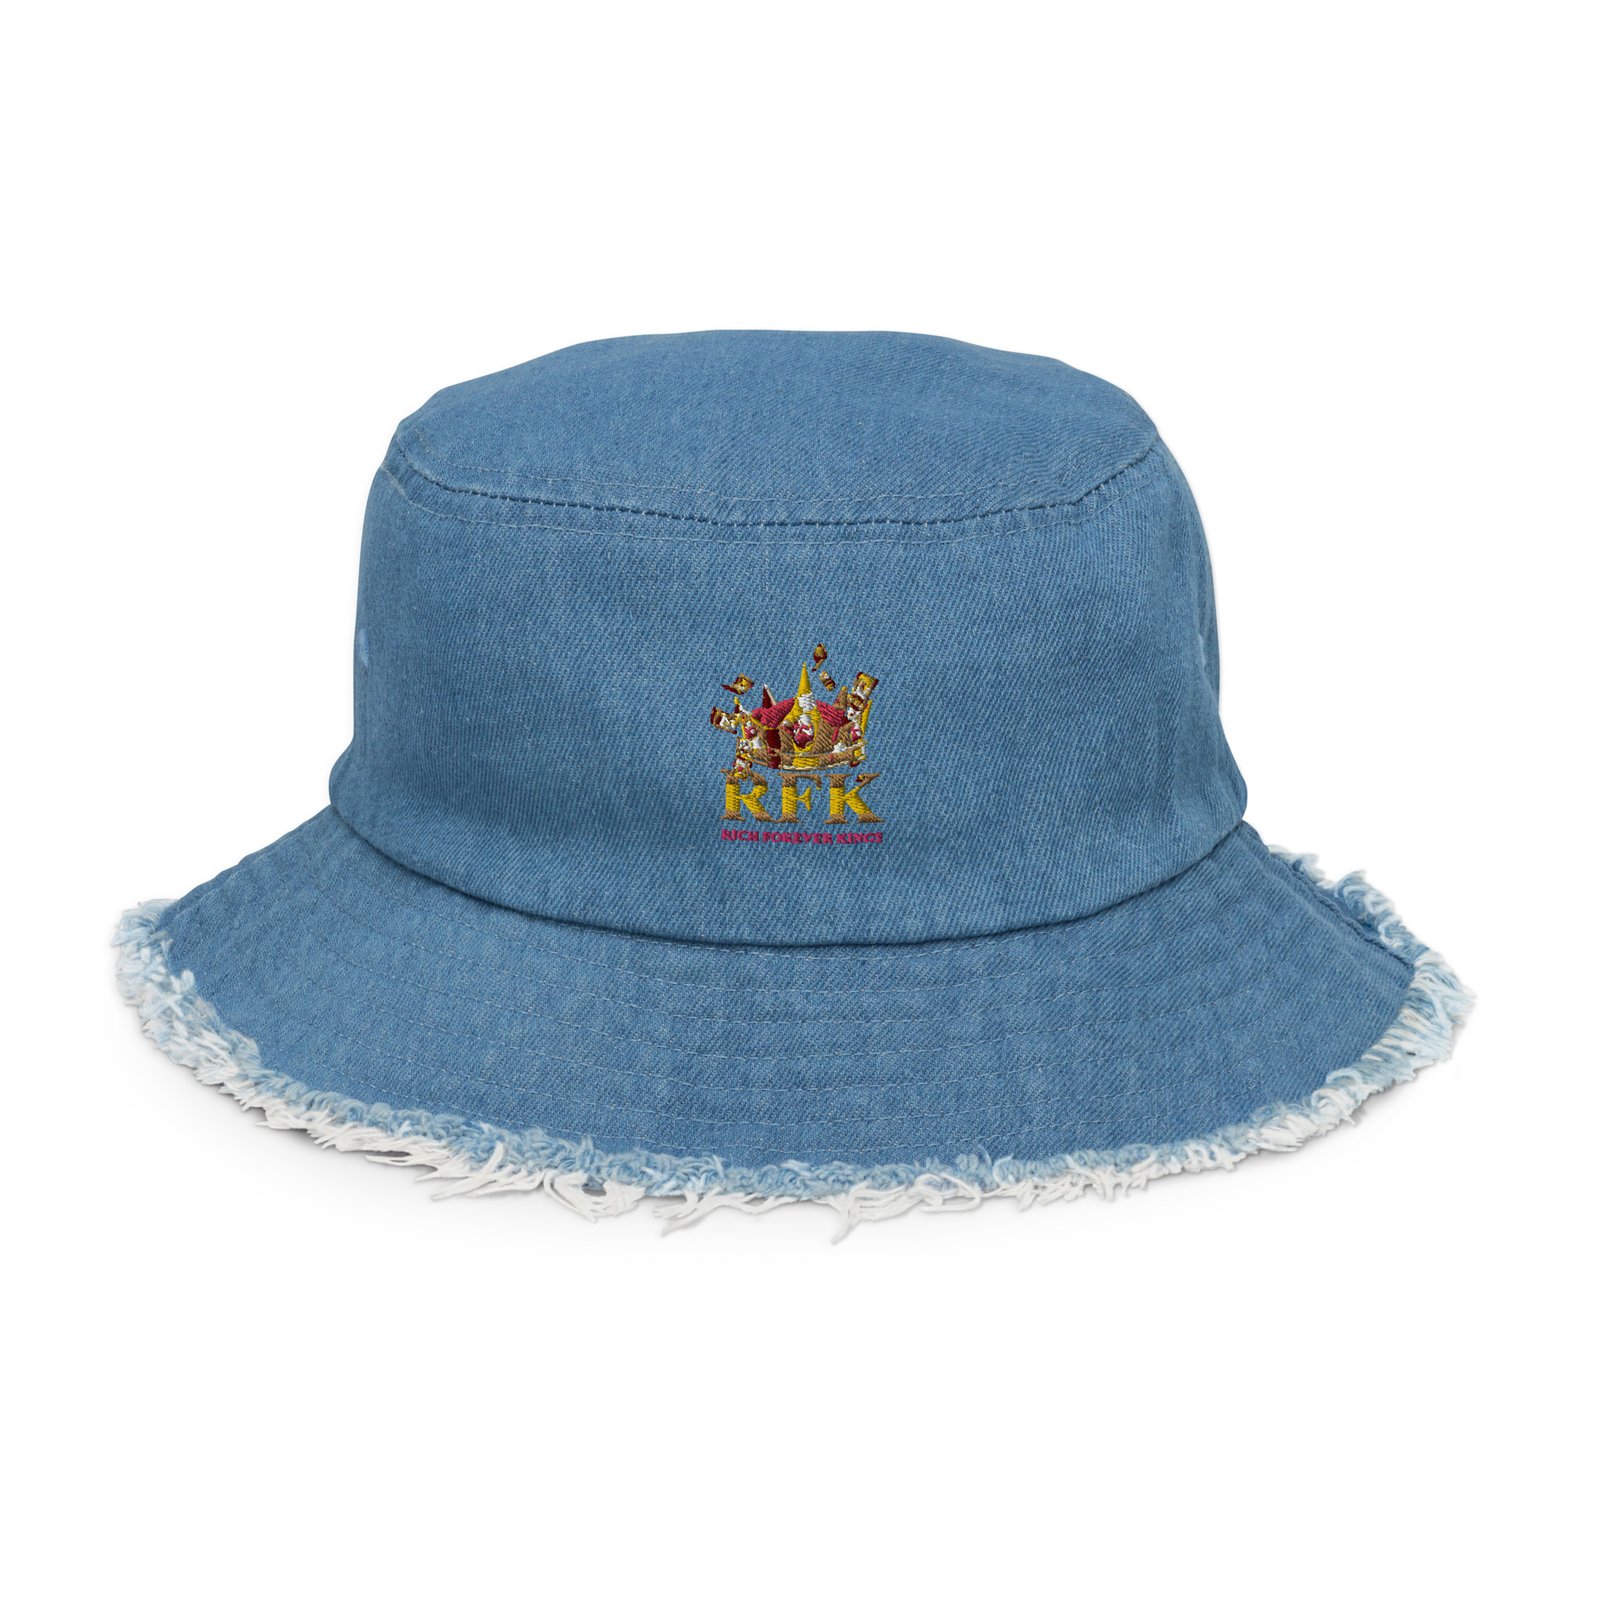 Distressed Denim Bucket Hat Ripped Frayed Edge Sun Hat for Women Men (deep  Blue) at Amazon Women's Clothing store